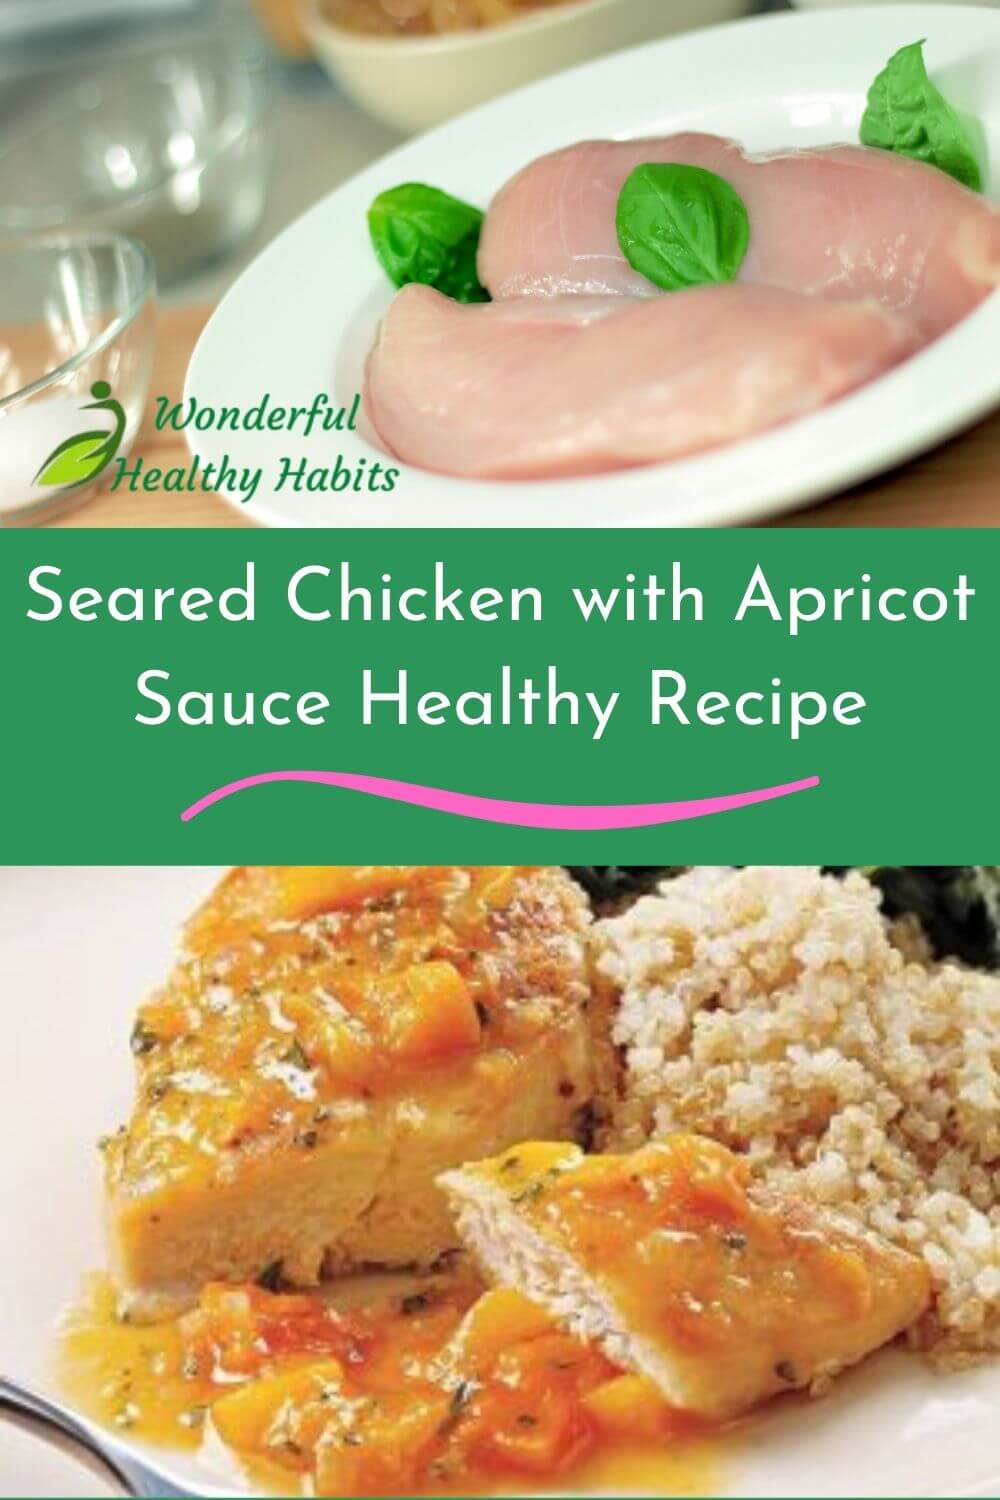 Seared Chicken with Apricot Sauce An Awesome Healthy Recipe